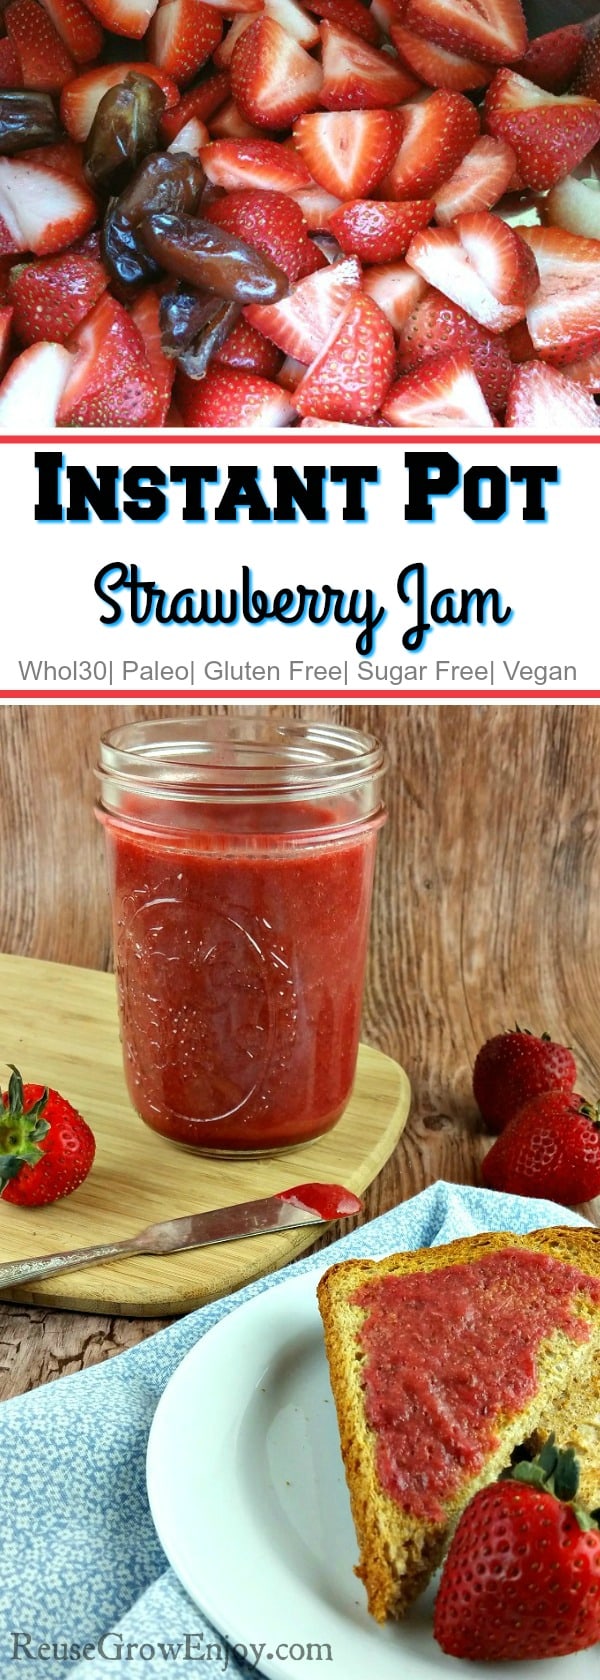 Have you ever made Instant Pot jam? It really is pretty easy! I love that you can control what goes in it. I am going to share my recipe for strawberry Instant Pot jam. This recipe is for strawberry jam but you could swap them out with any of your favorite berries.